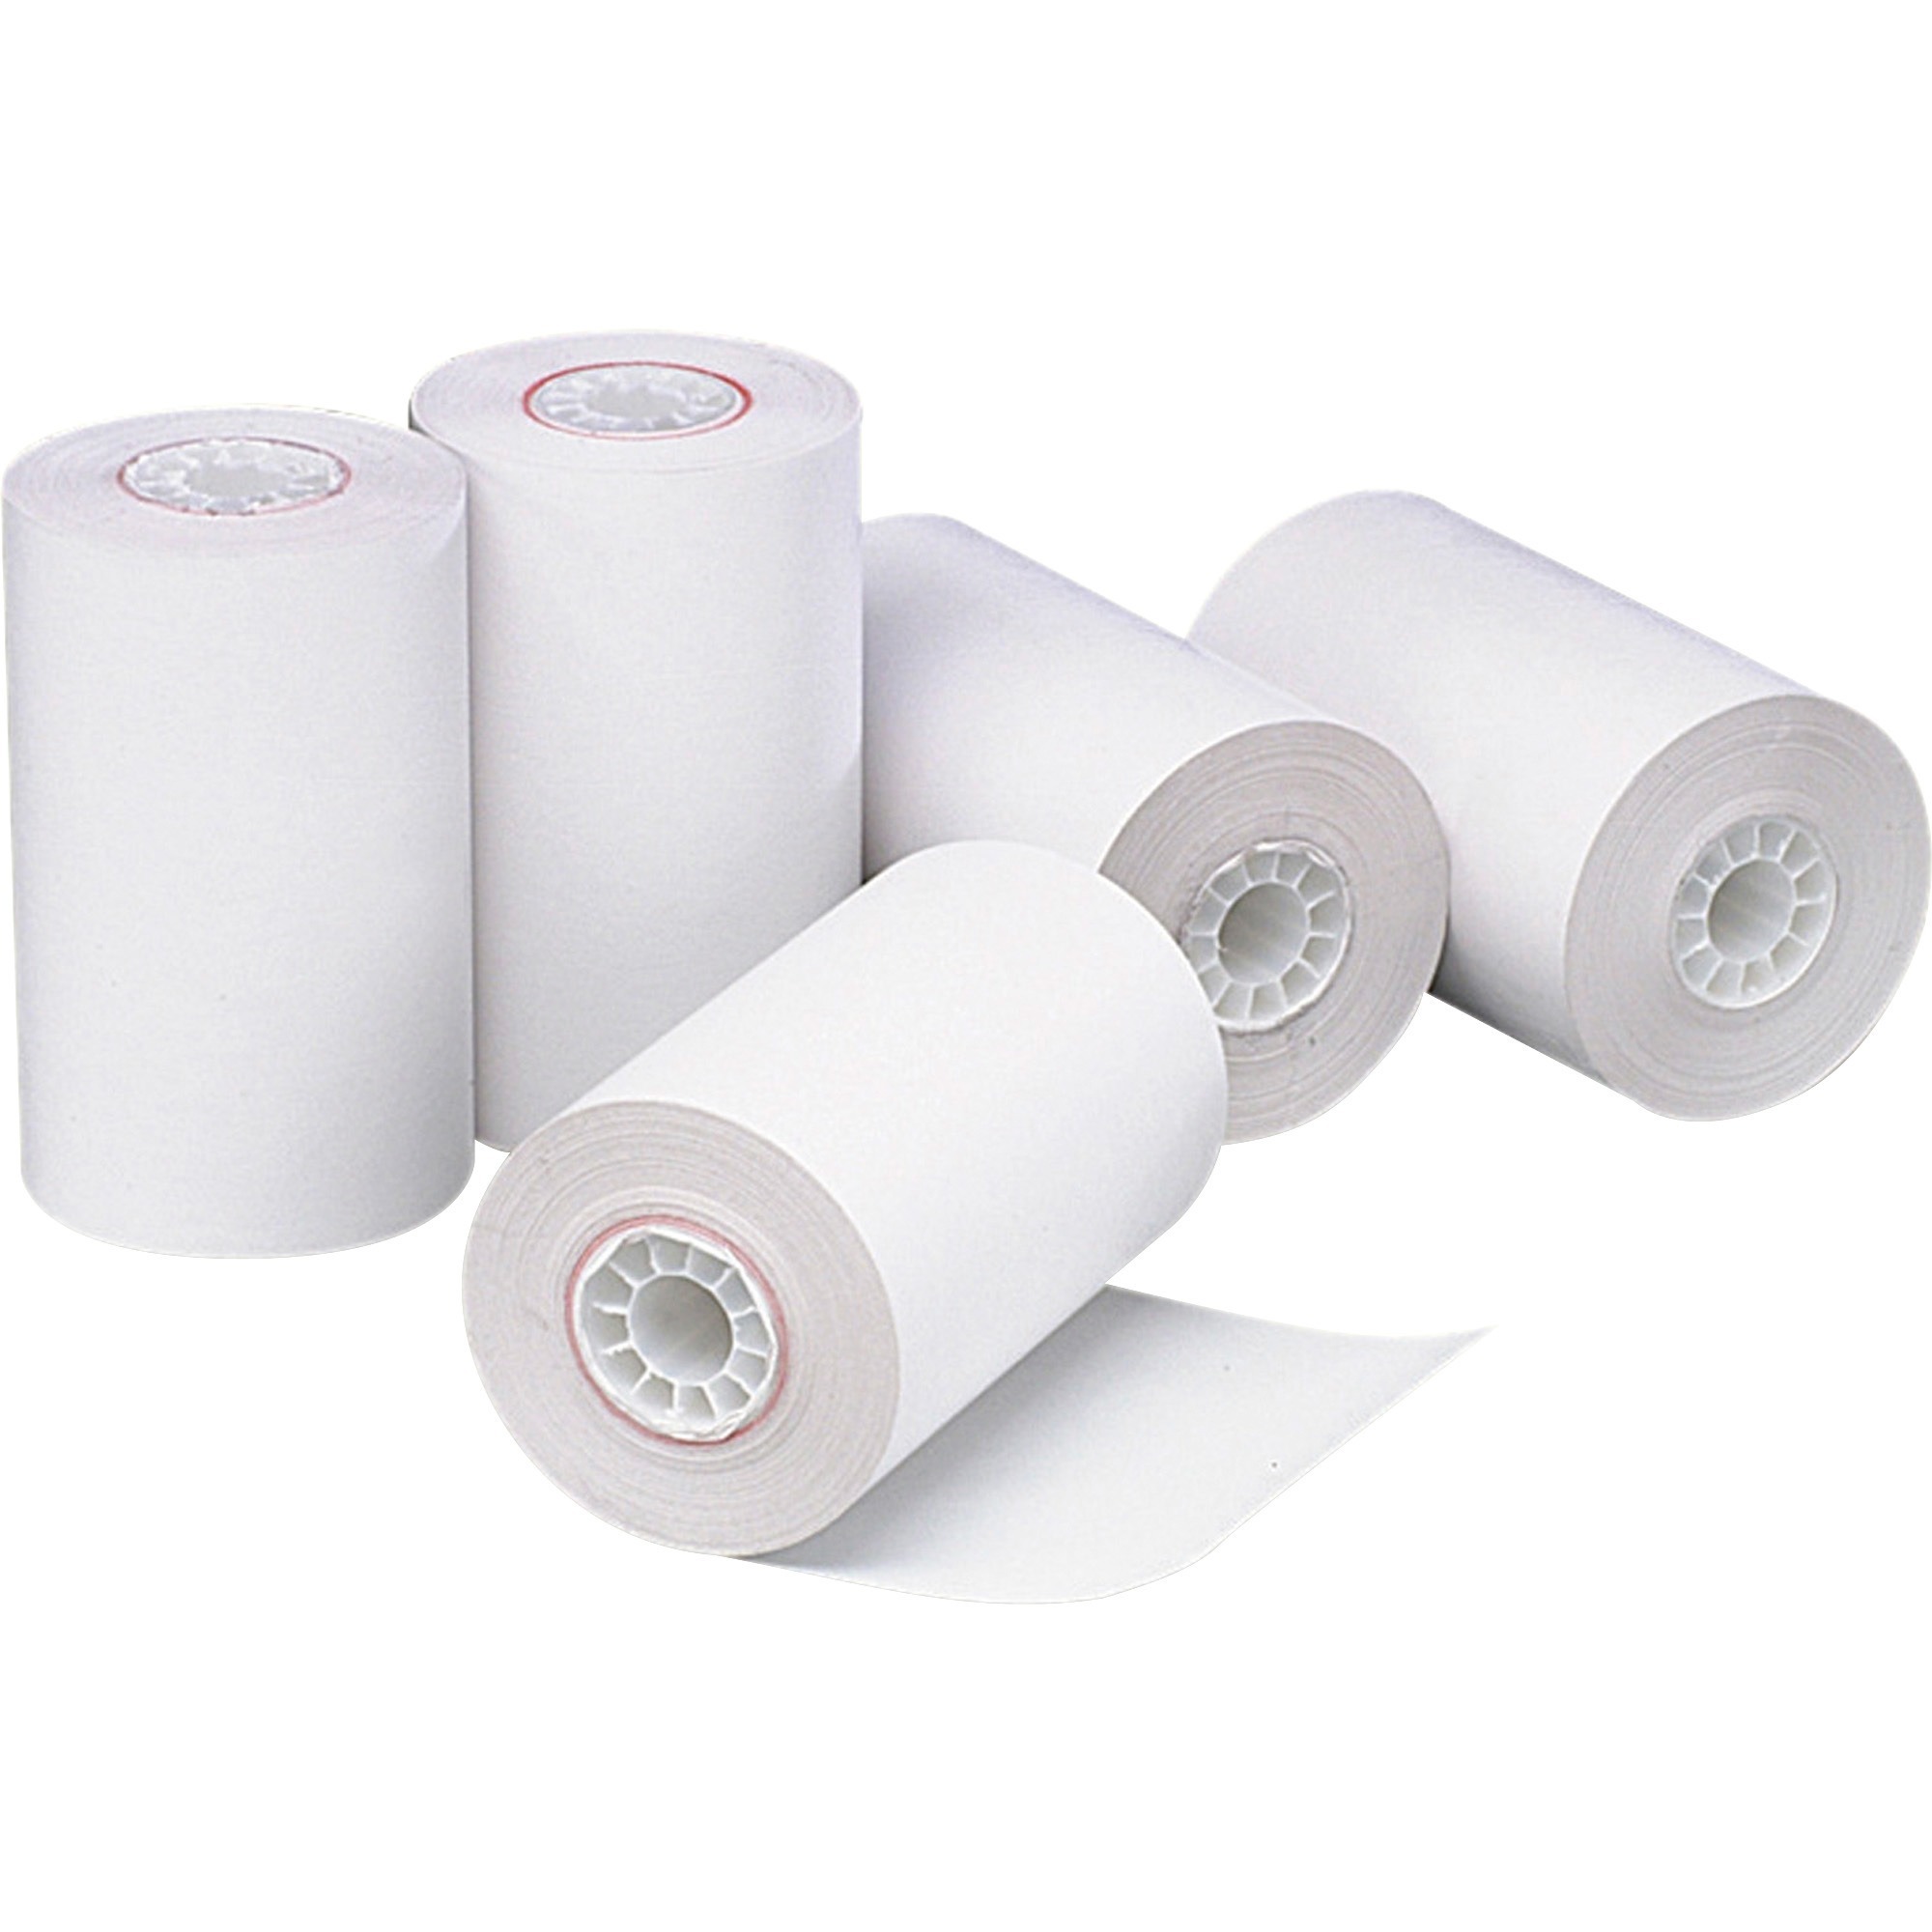 Direct Thermal Printing Thermal Paper Rolls, 1.75" x 150 ft, White, 10/Pack